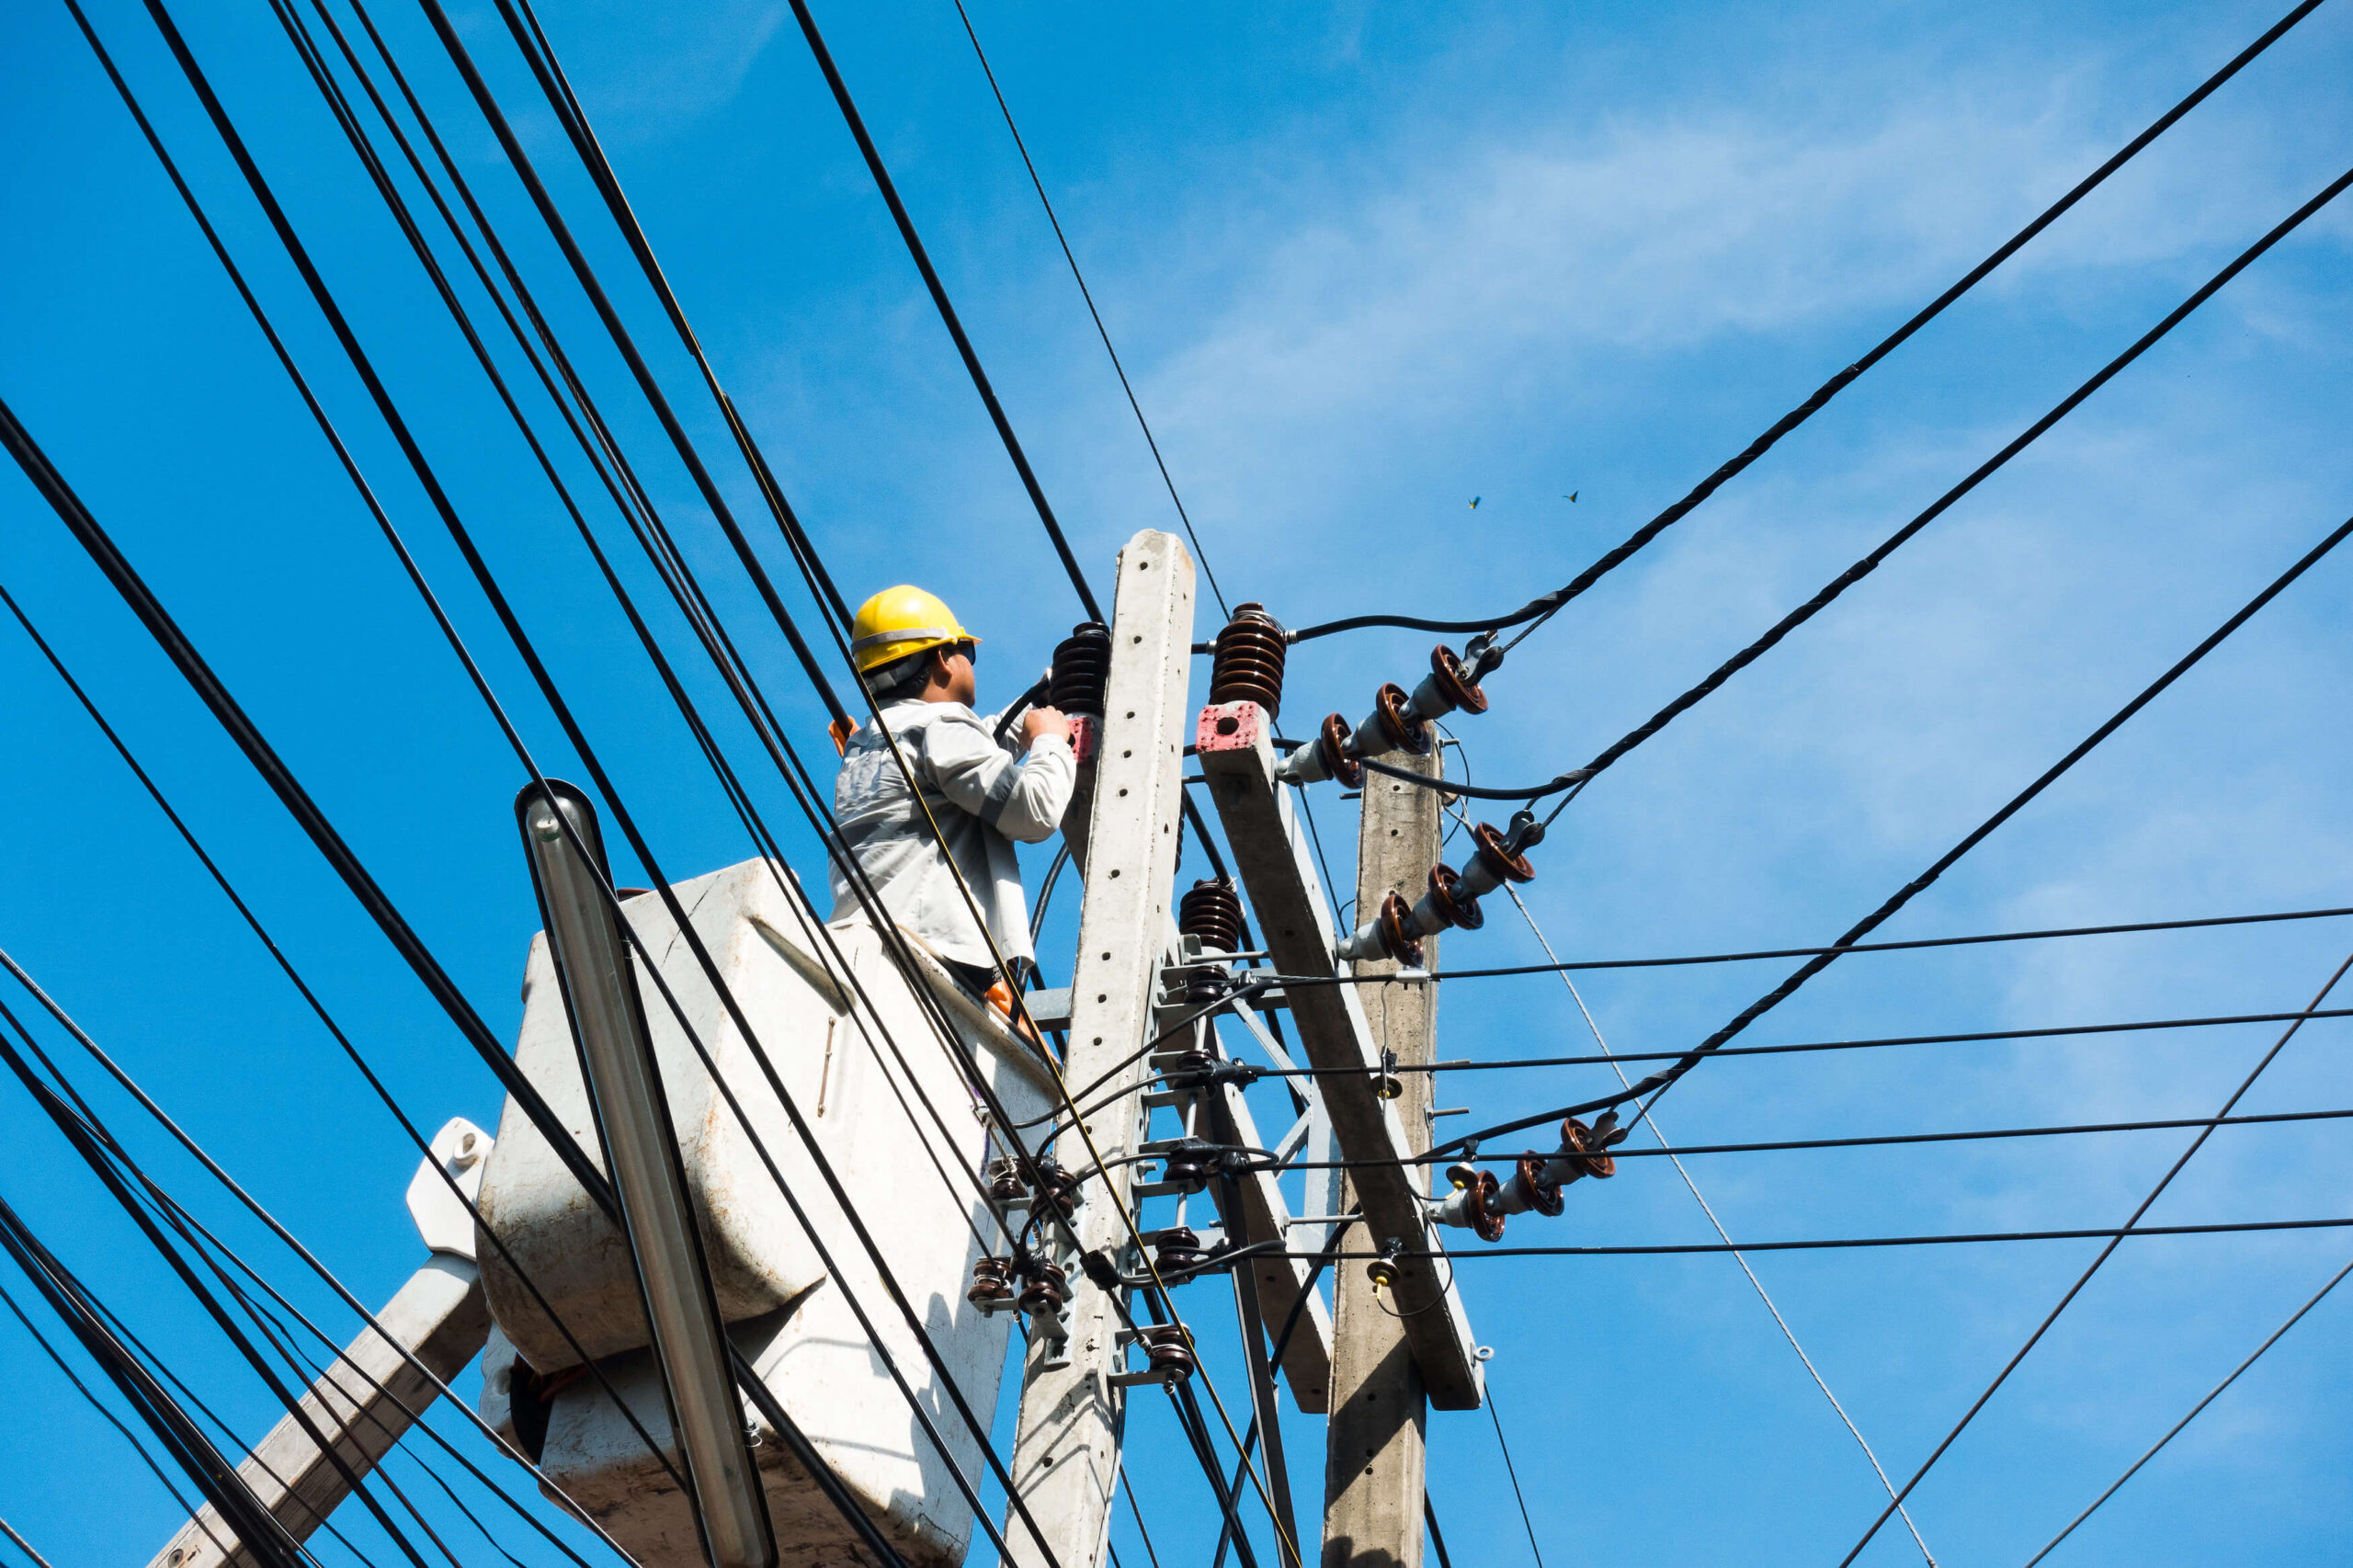 electricians repairing wire of the power line on electric power pole on crane